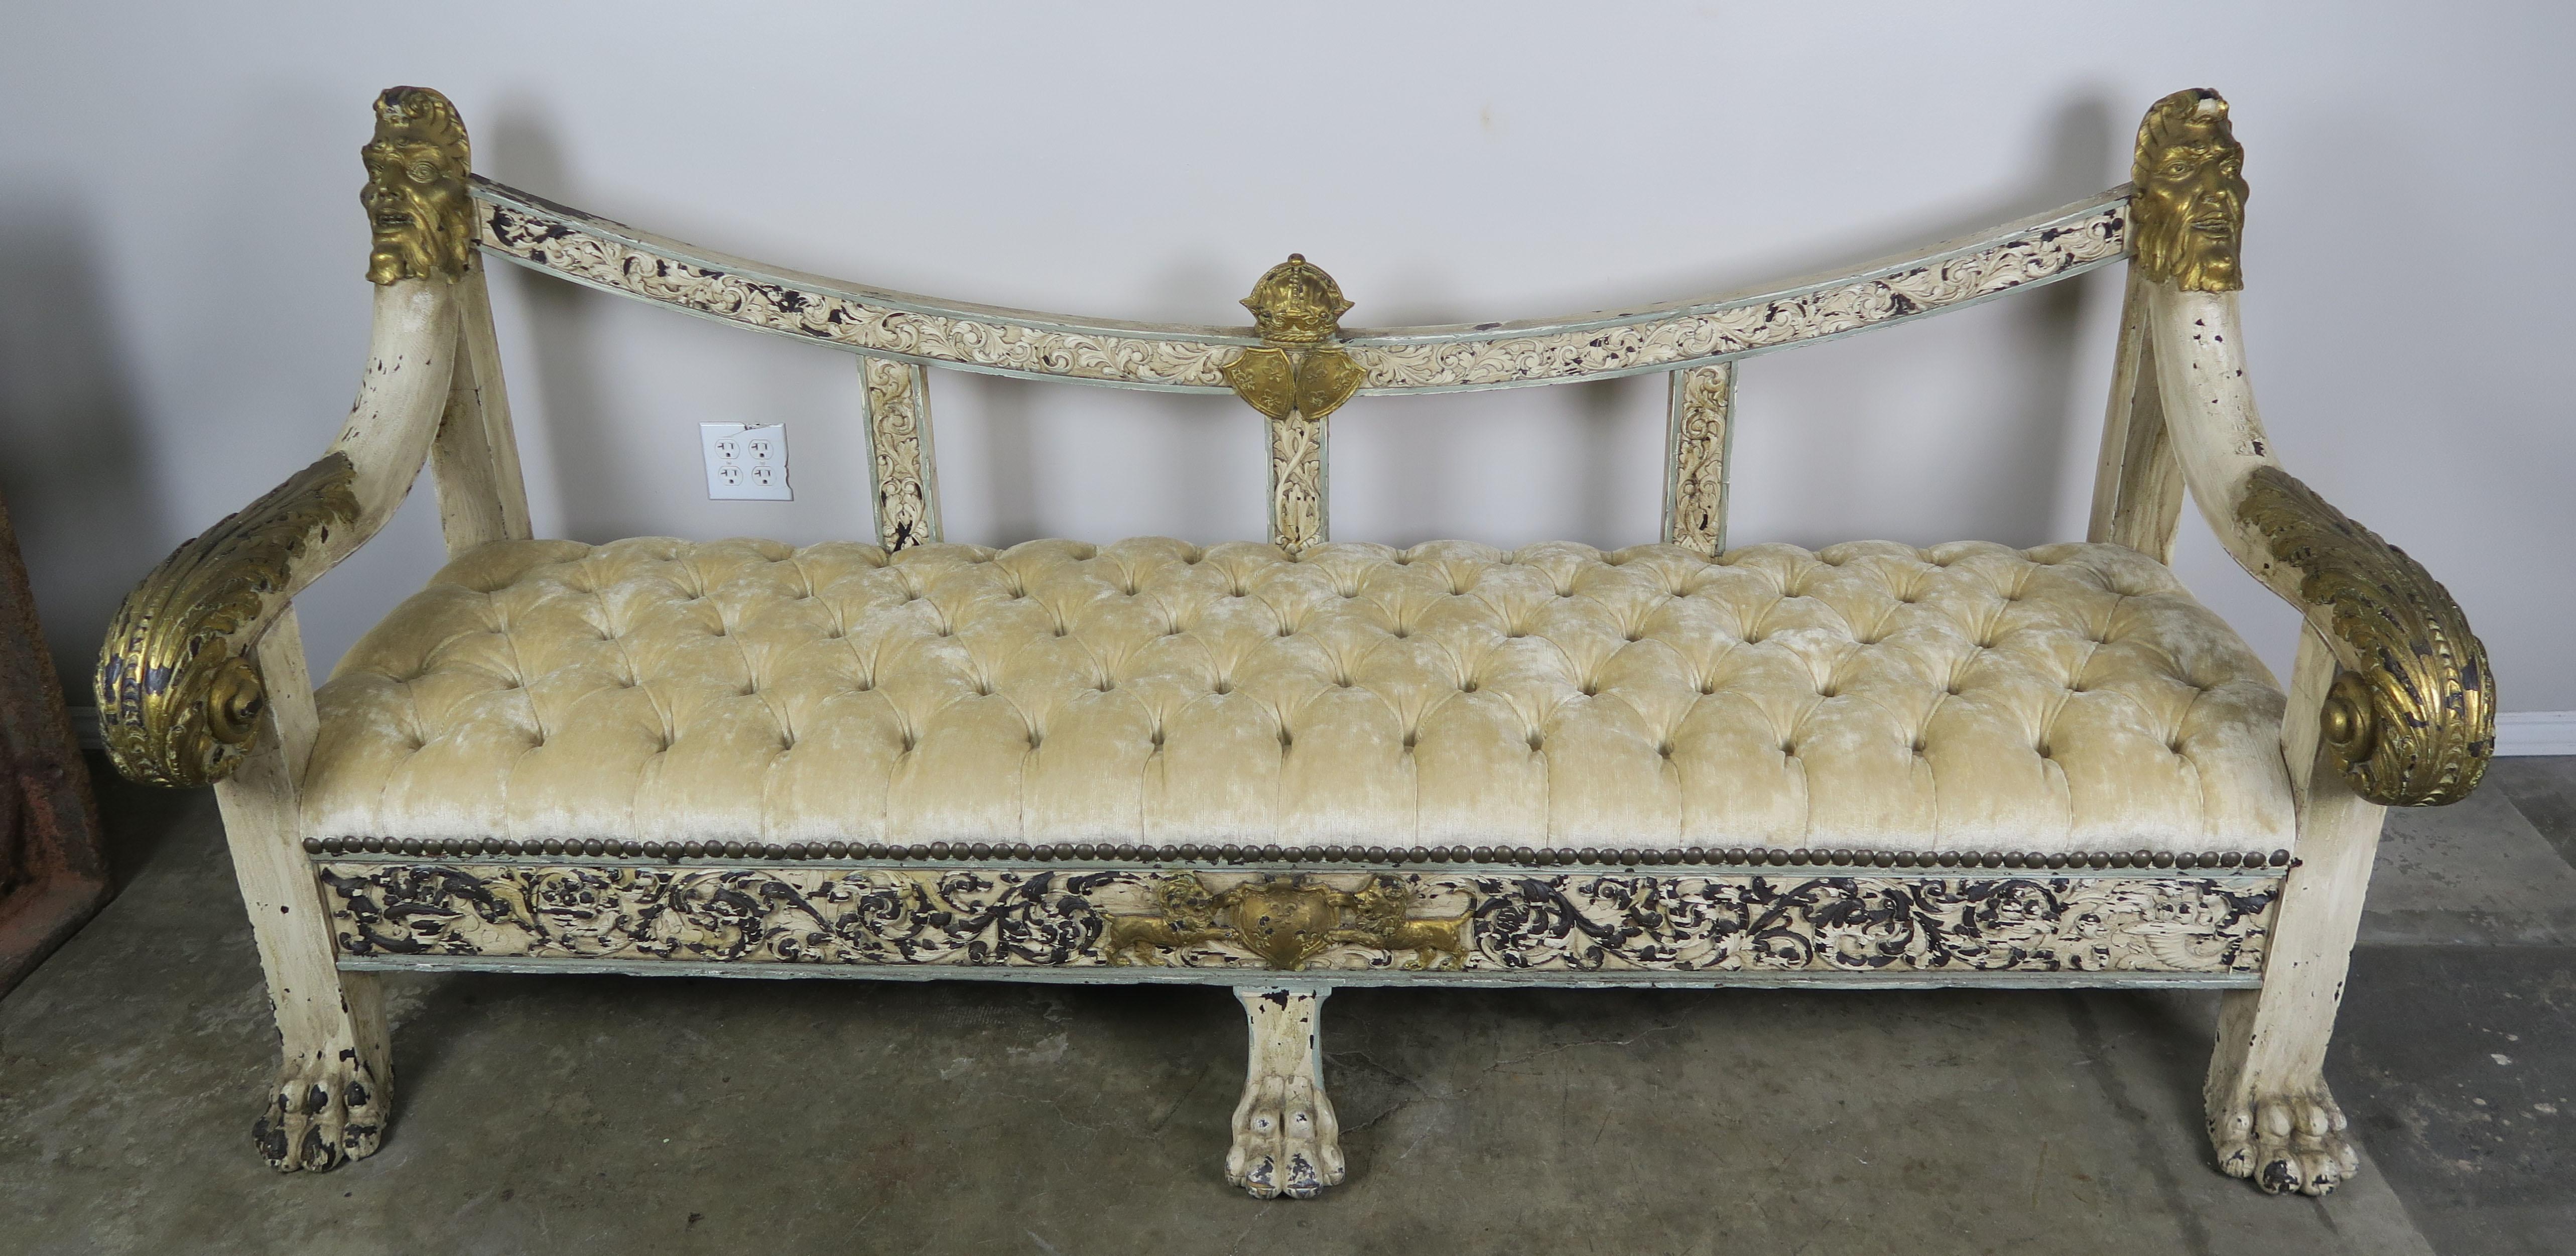 19th century Spanish Baroque style painted and parcel-gilt bench with lion feet. Beautiful carved gilt wood crown w/ pair of shields are depicted in the center of the sofa. Two detailed faces are carved at the tops of both arms and scrolled acanthus